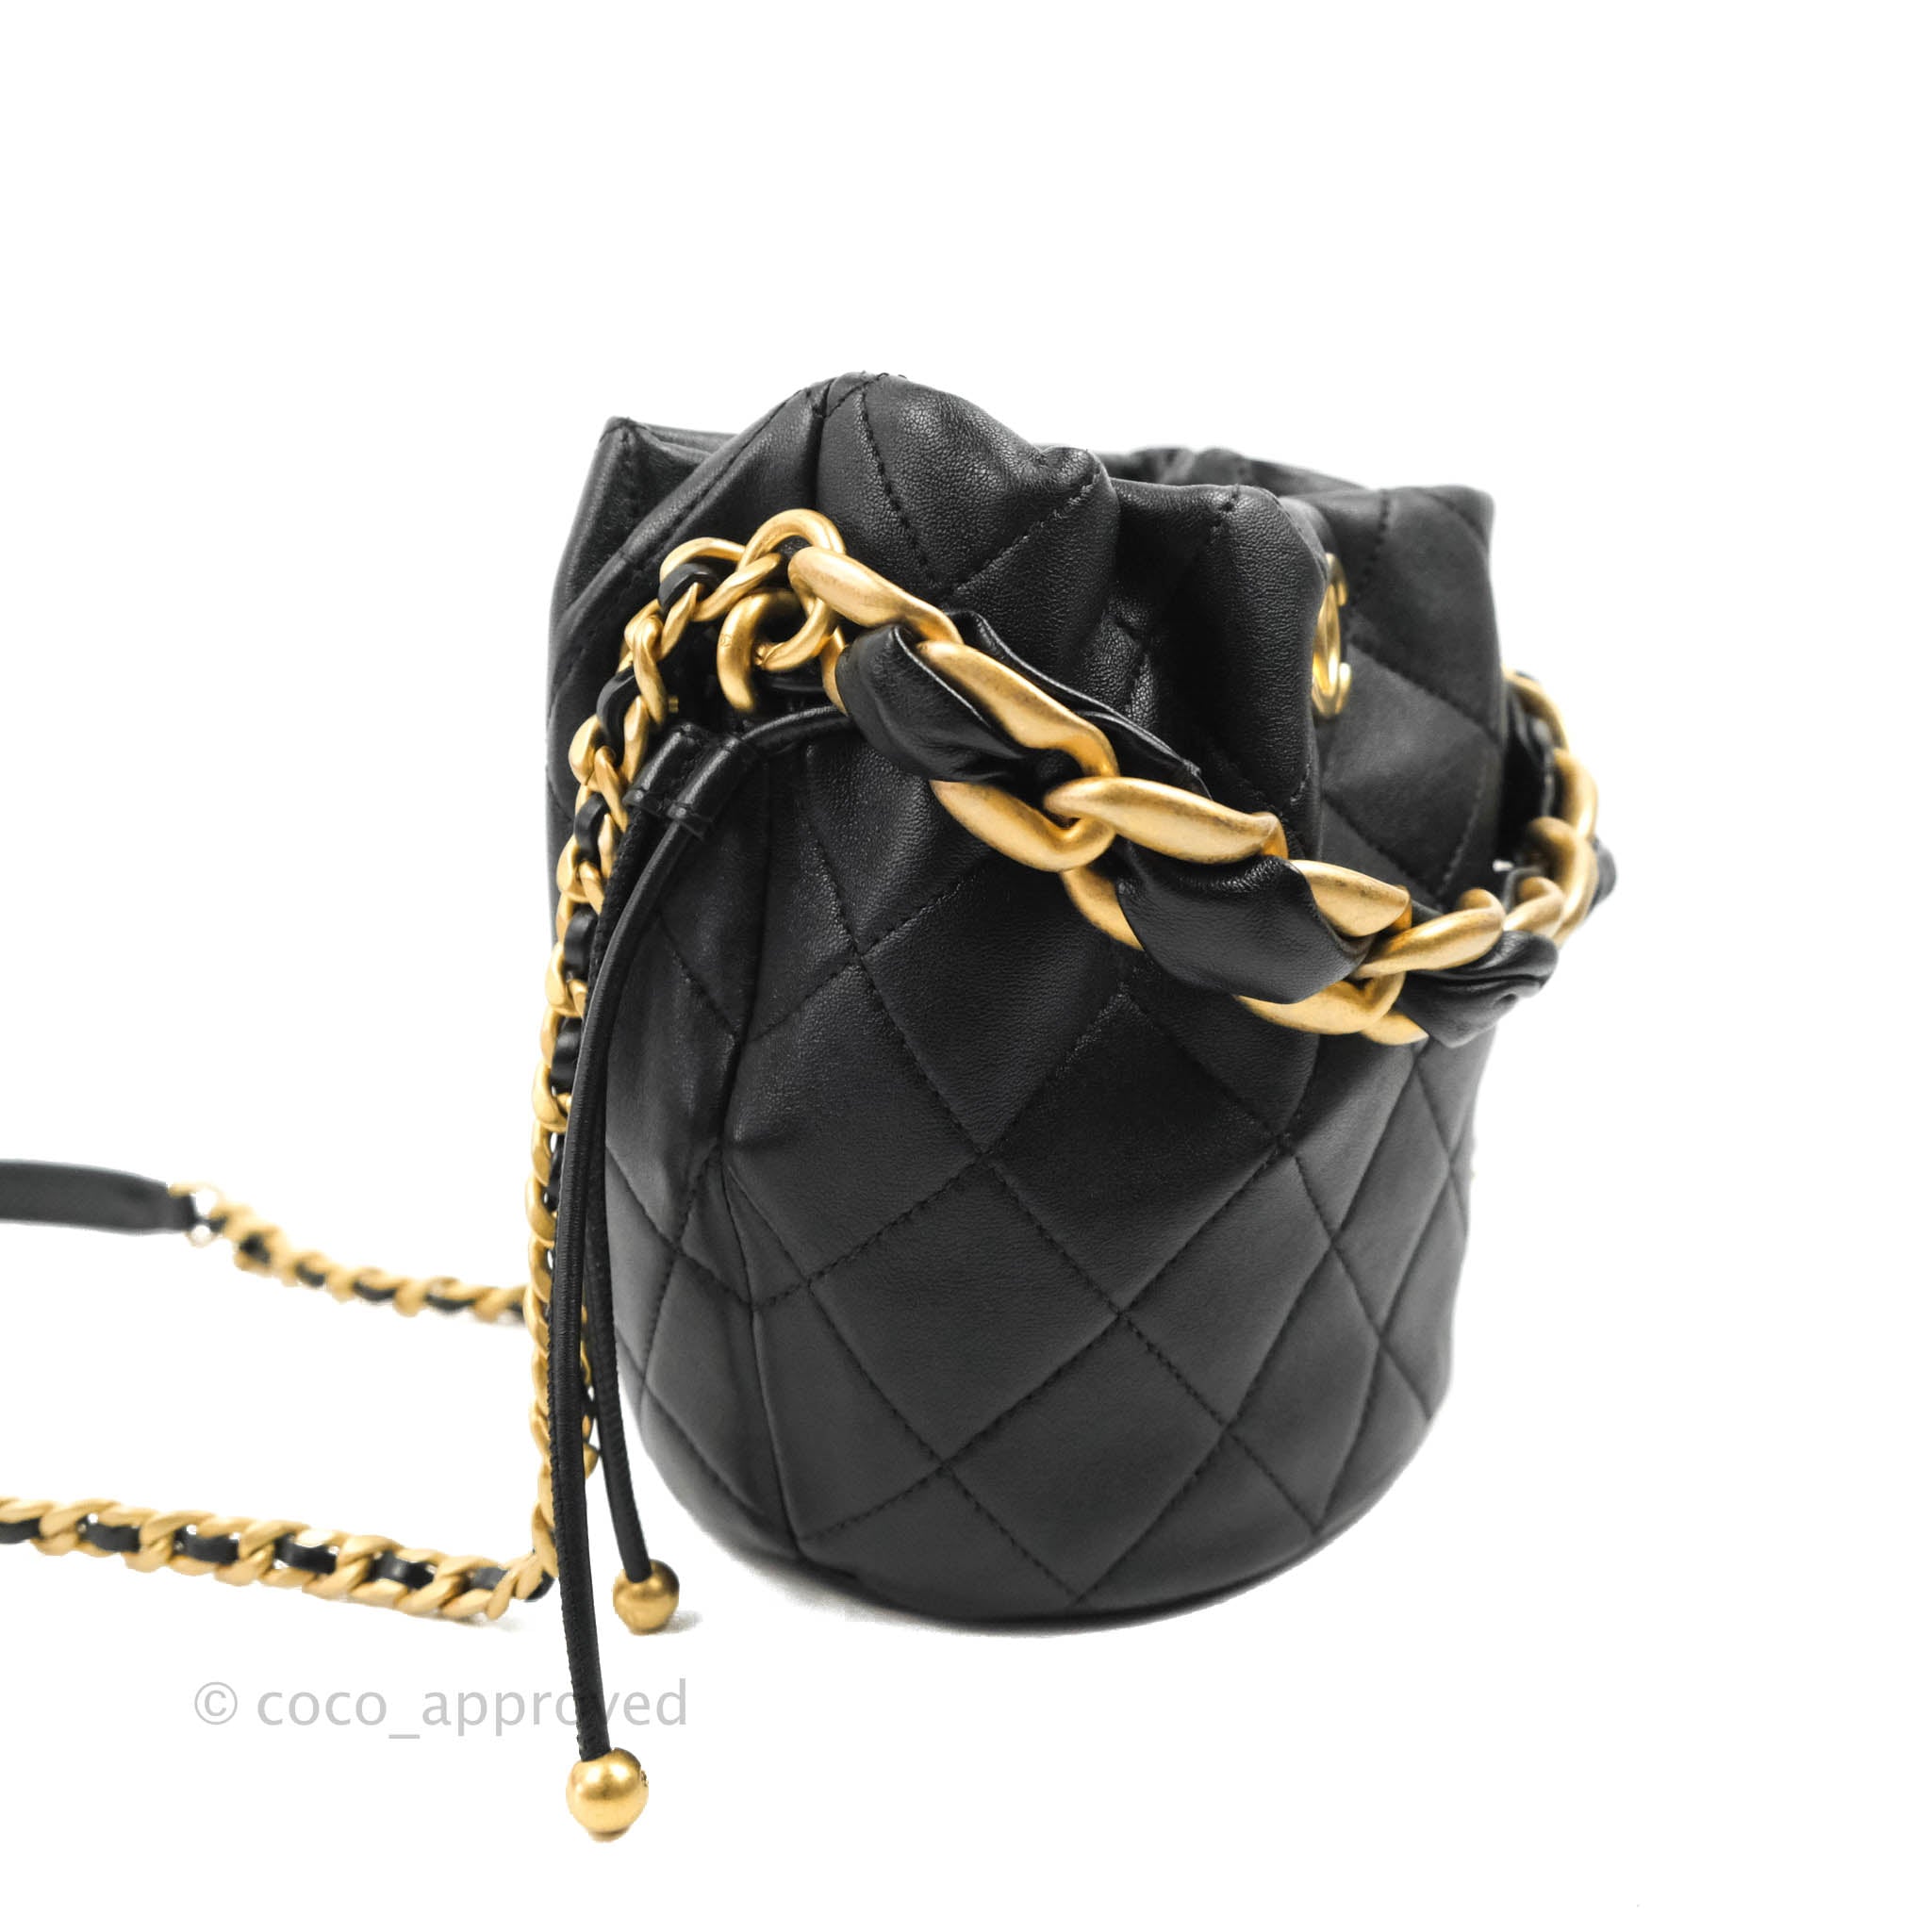 Chanel Large Quilted Chain Bucket Bag